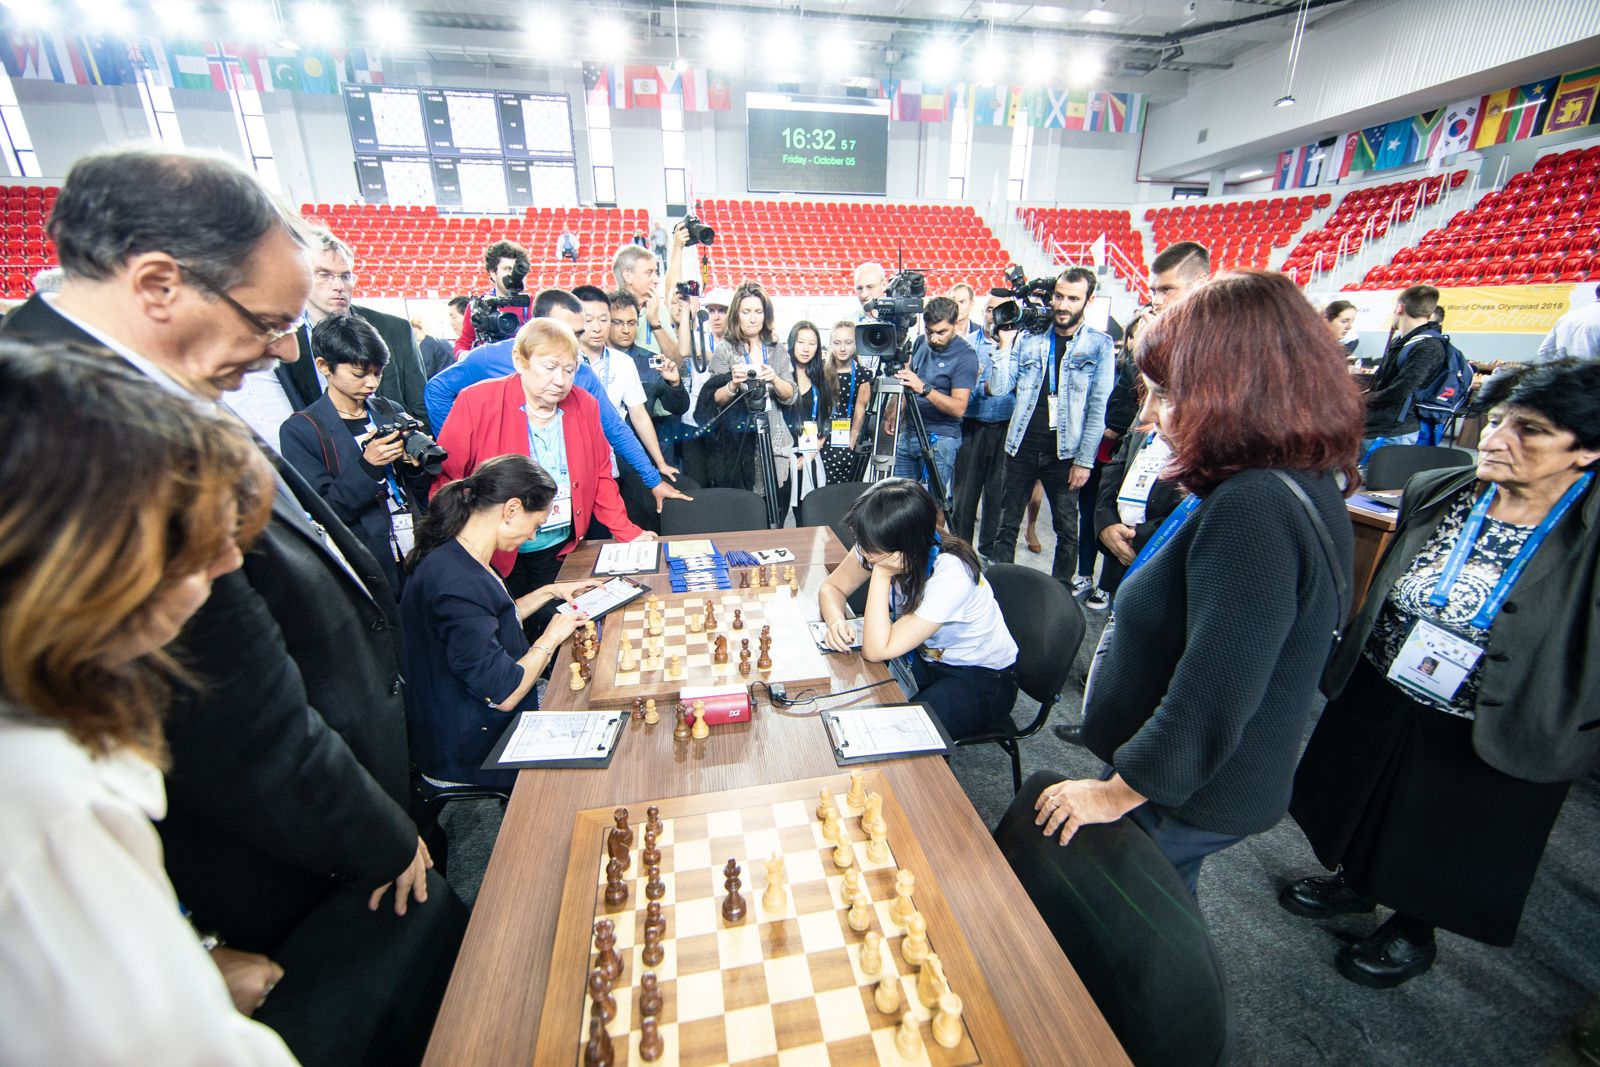 Round 4 board pairings: Olympiad heating up - Olympiad News